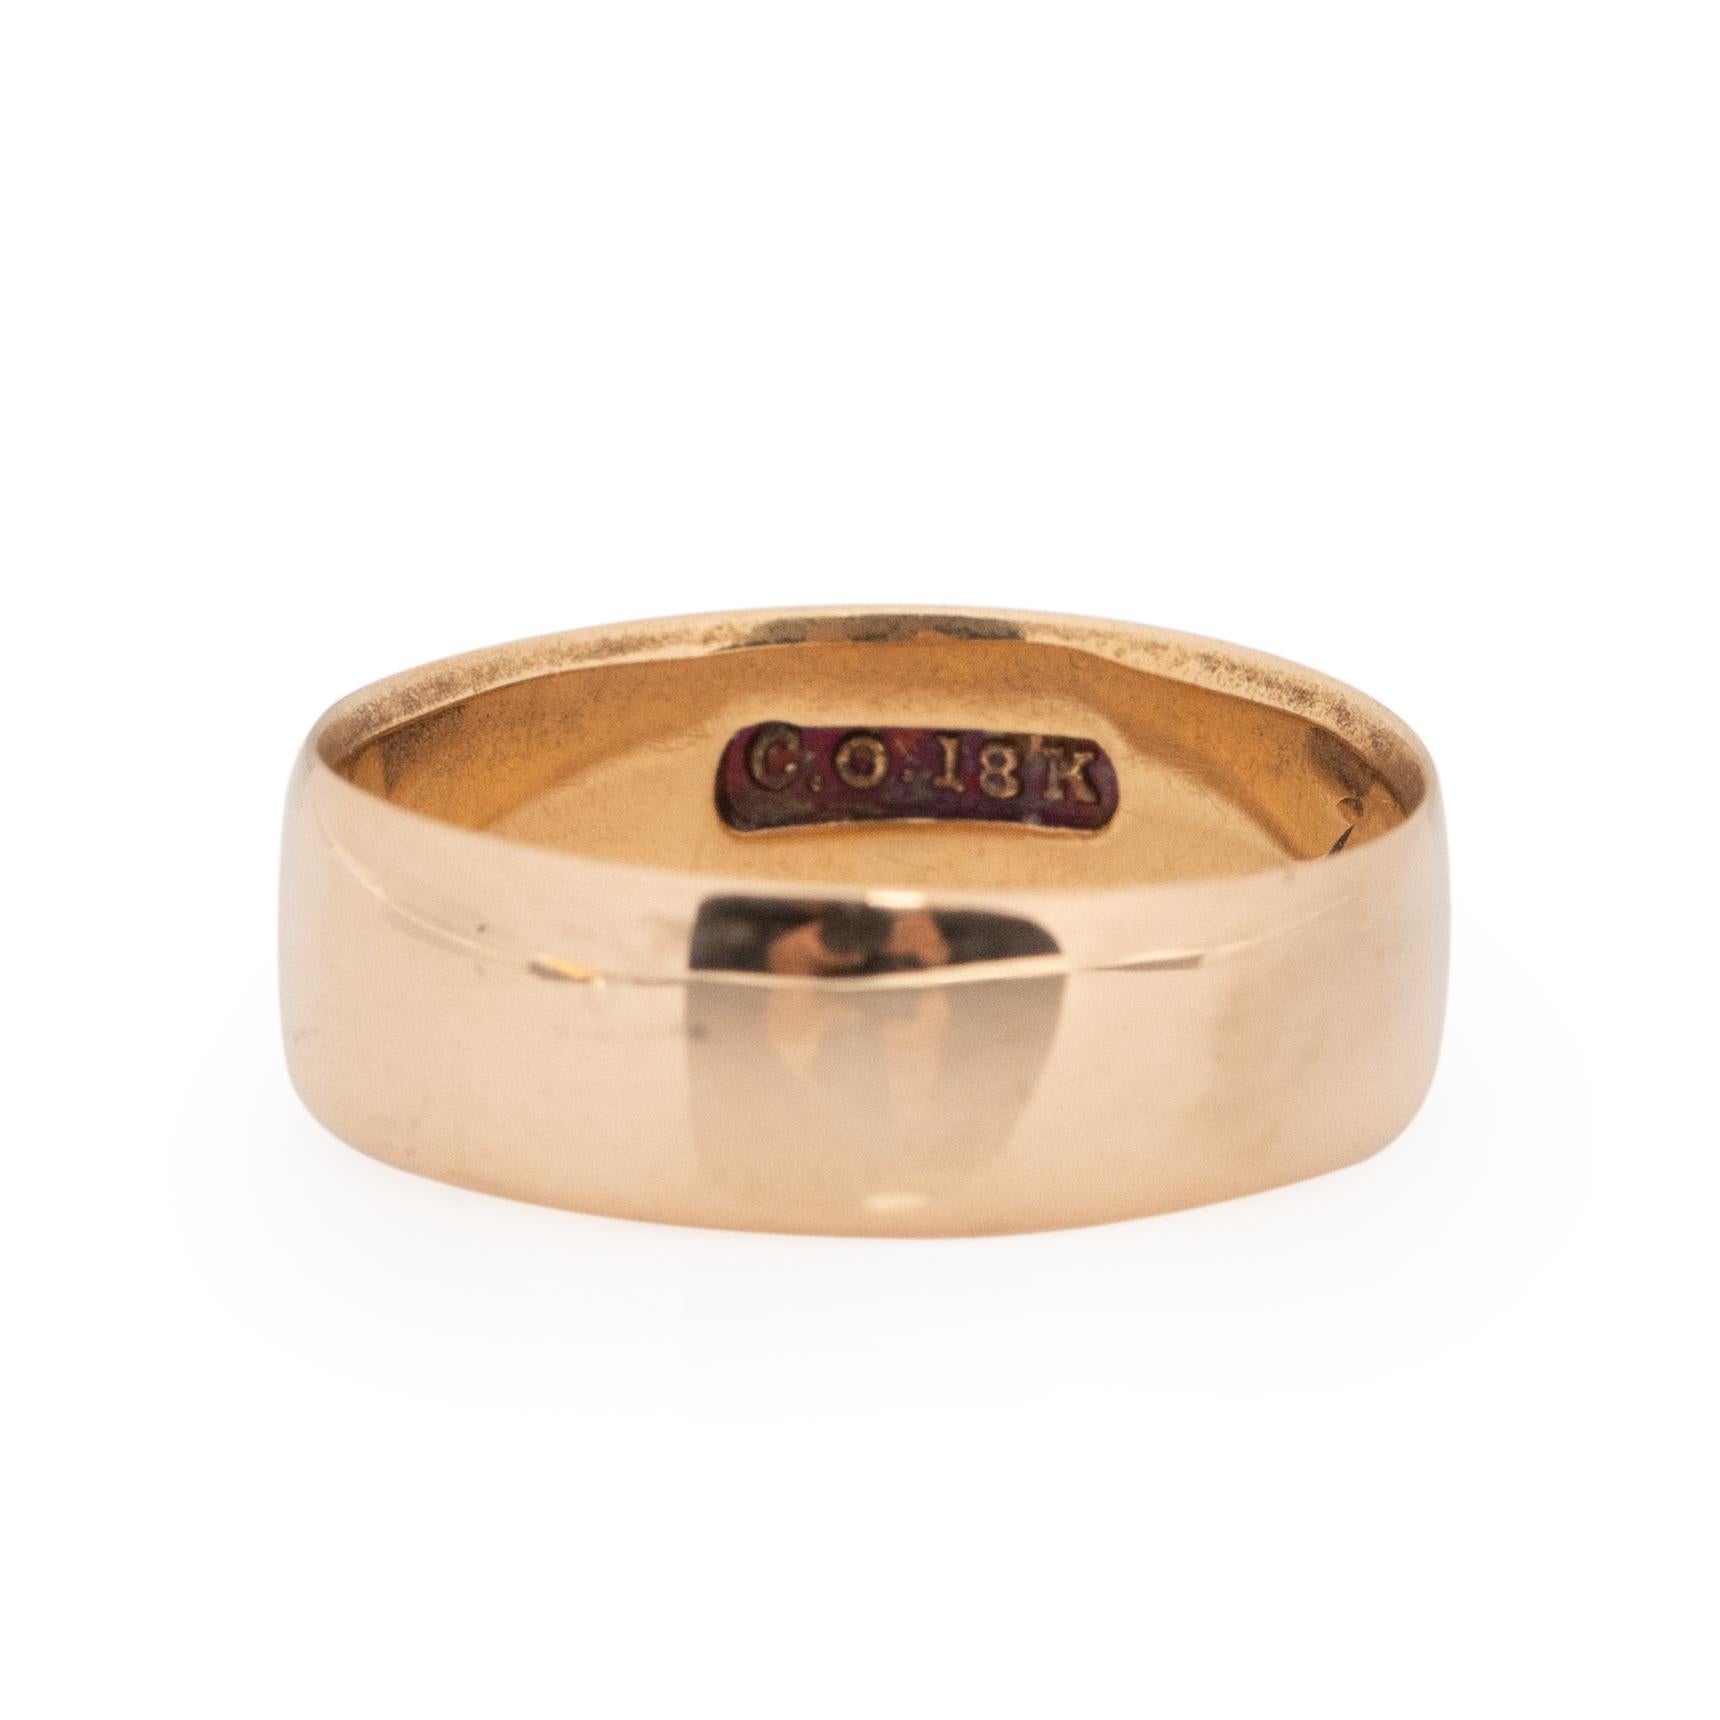 This rose gold beauty is a fun, versatile piece. With a love note engraved inside the shank (C.P to M.F. 6/26/07. Crafted in 18K rose gold this wide and has a thin thickness and a sleek look. Great for men or woman, this ring could be stacked with